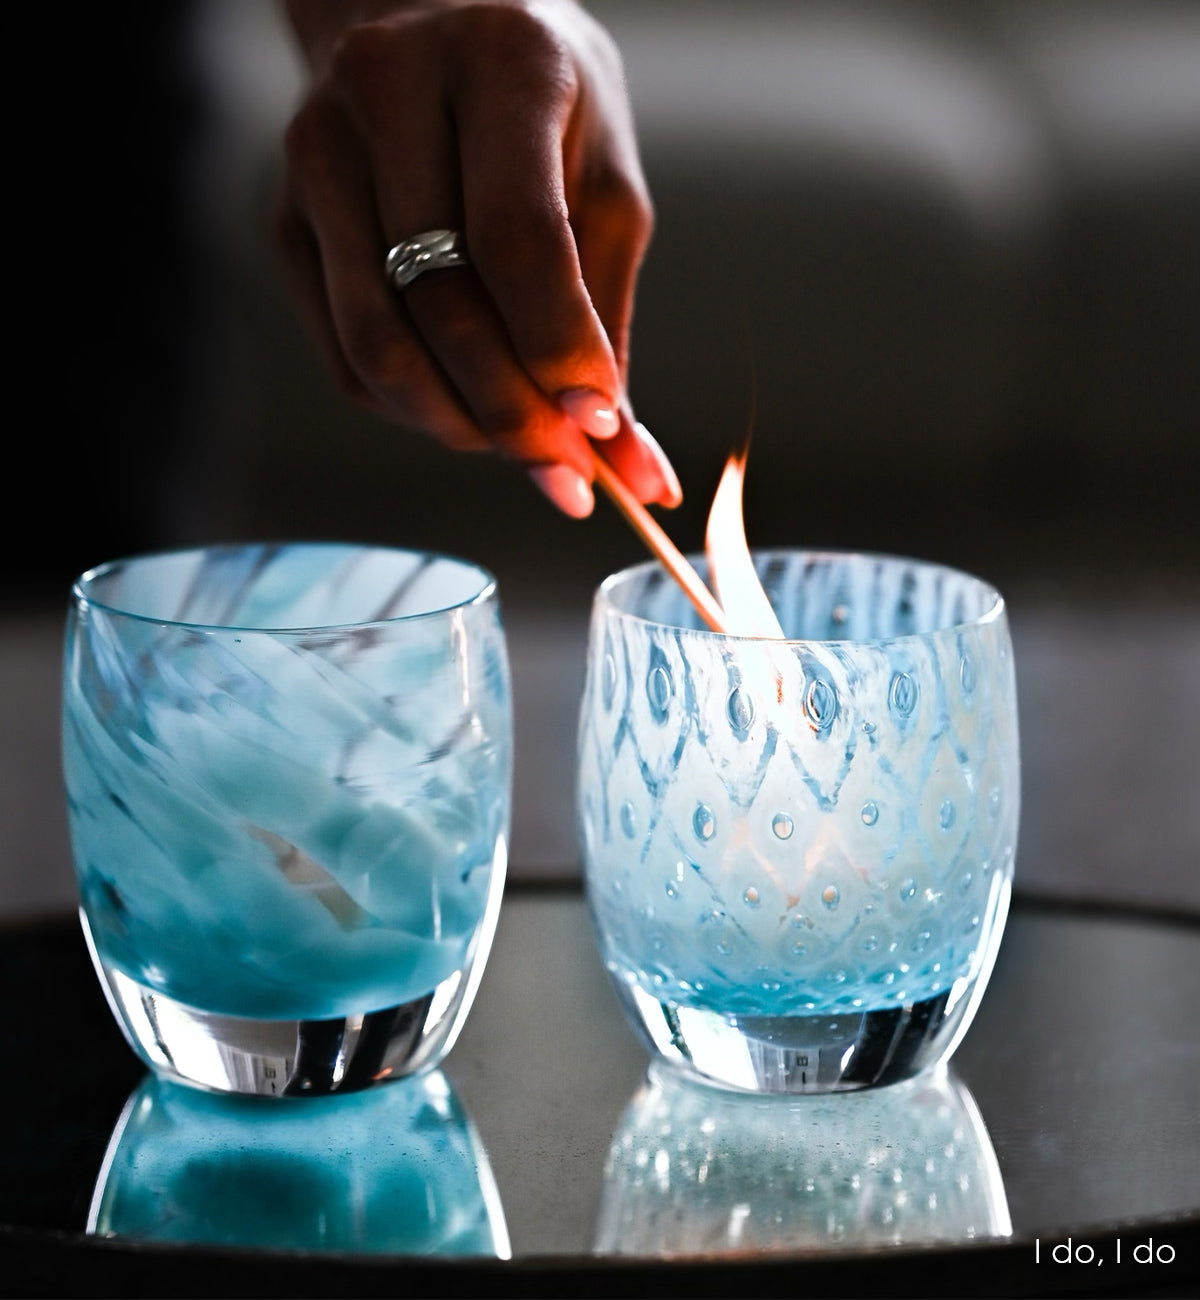 I do, I do is a set of two patterned light blue hand-blown glass candle holders. it includes good choice, a light blue bubble pattern and blessing a mottled blue pattern.